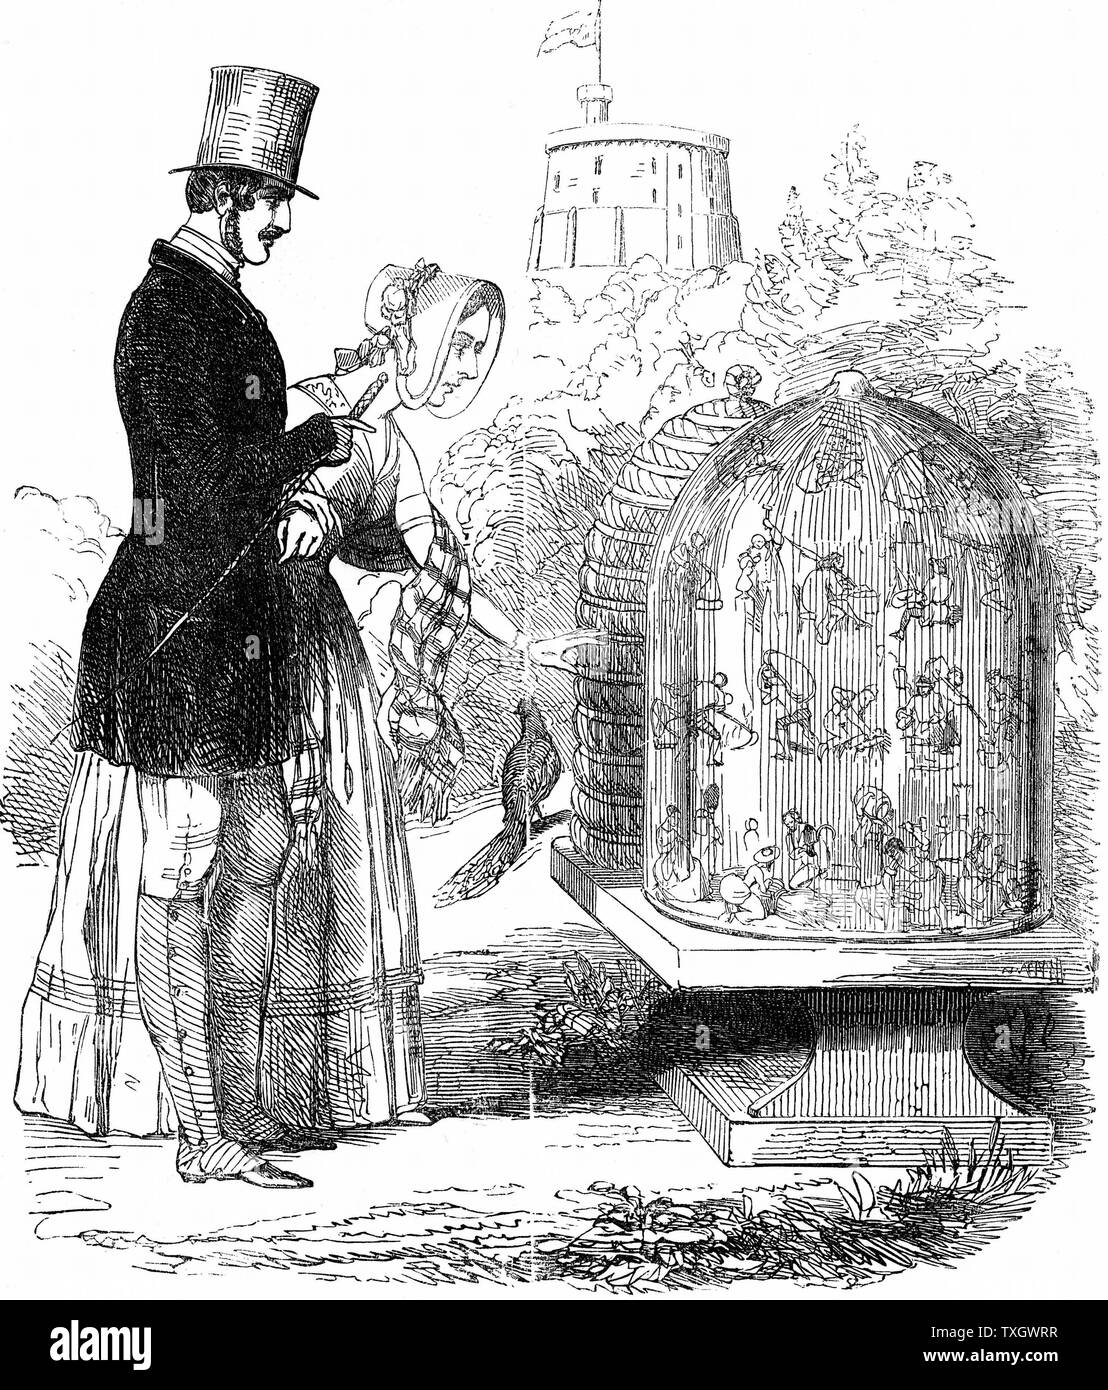 Albert (1819-1861) Prince Consort of Queen Victoria, introduced improved hives in royal apiaries, allowing honey to be harvested and bee colony (workers) preserved with just enough honey to exist over winter.  1844 Albert showing his hives to Victoria Cartoon from 'Punch', equating bees with exploited British labourers Stock Photo